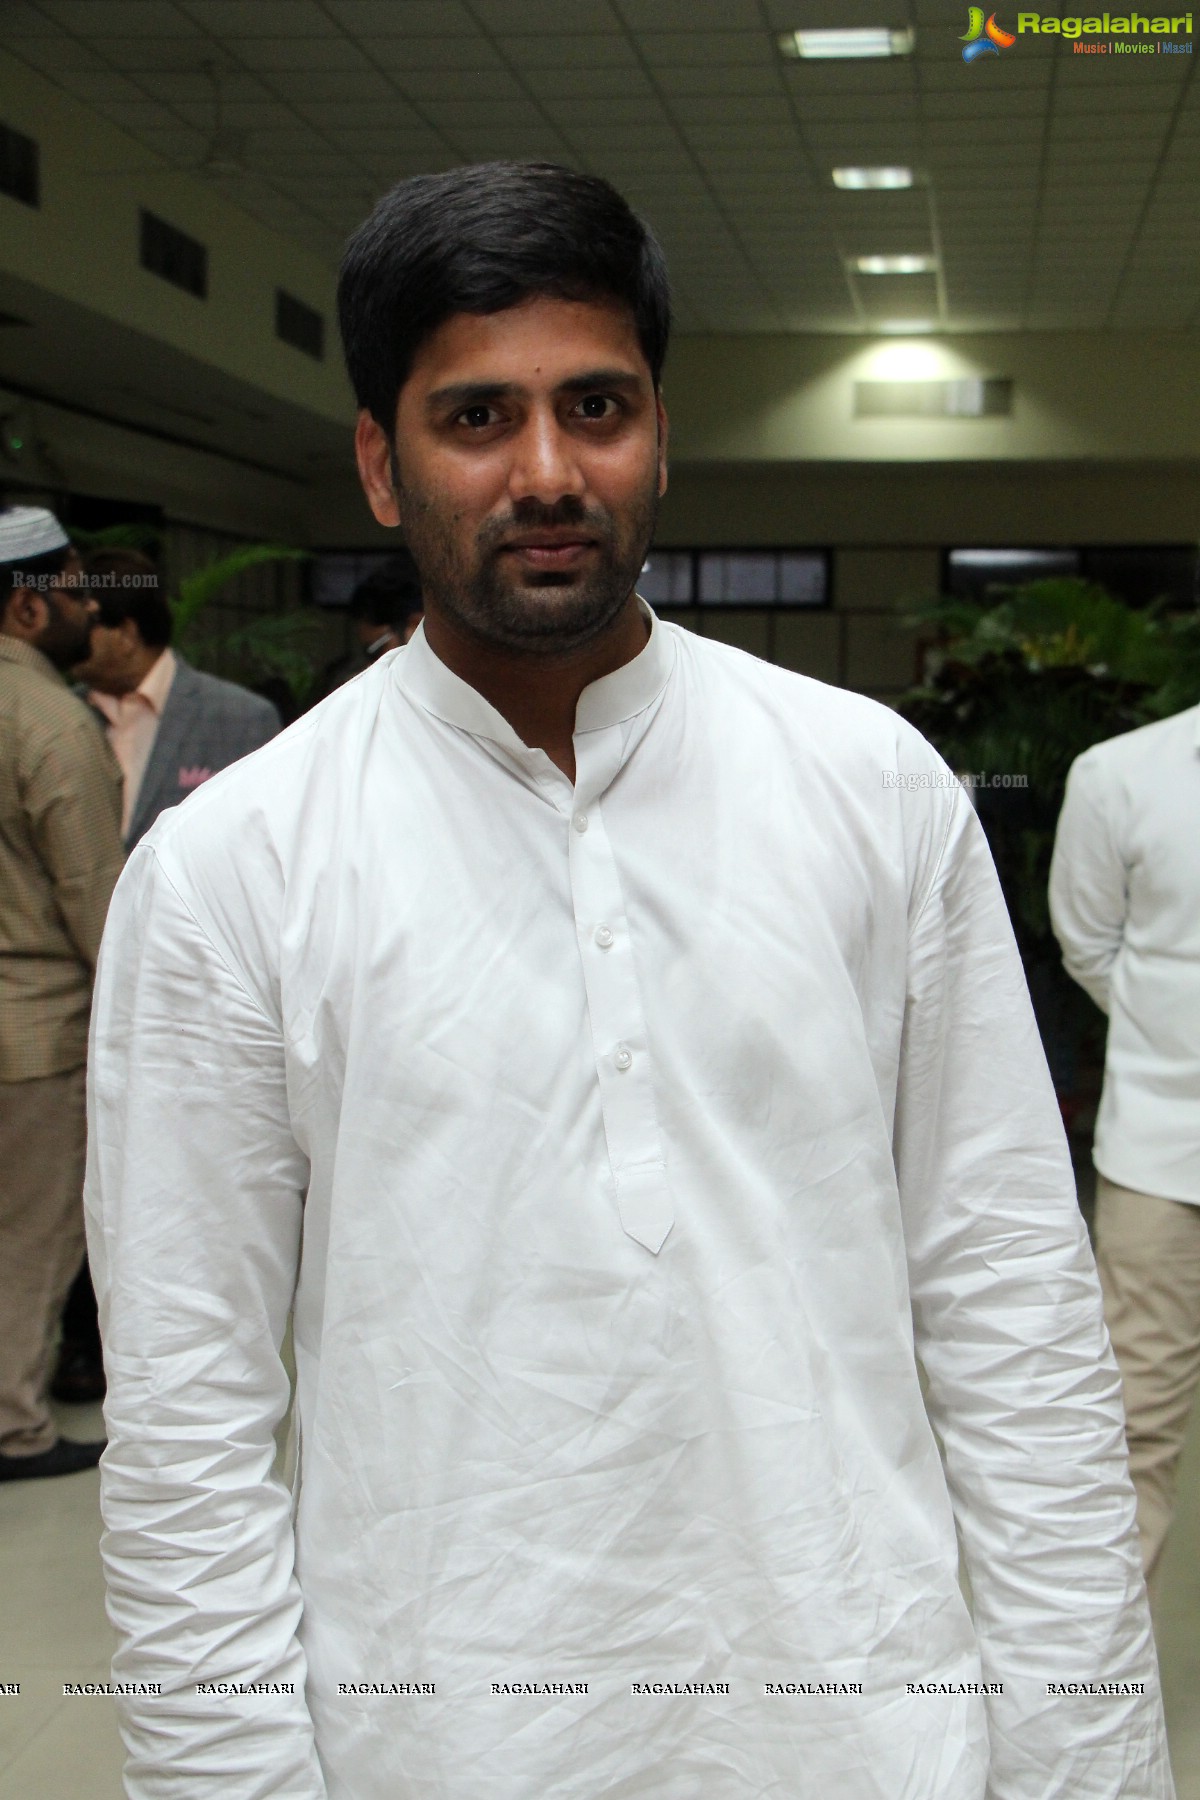 Iftar Party by Sultan-Ul-Uloom Education Society at Ghulam Ahmed Auditorium, Hyderabad